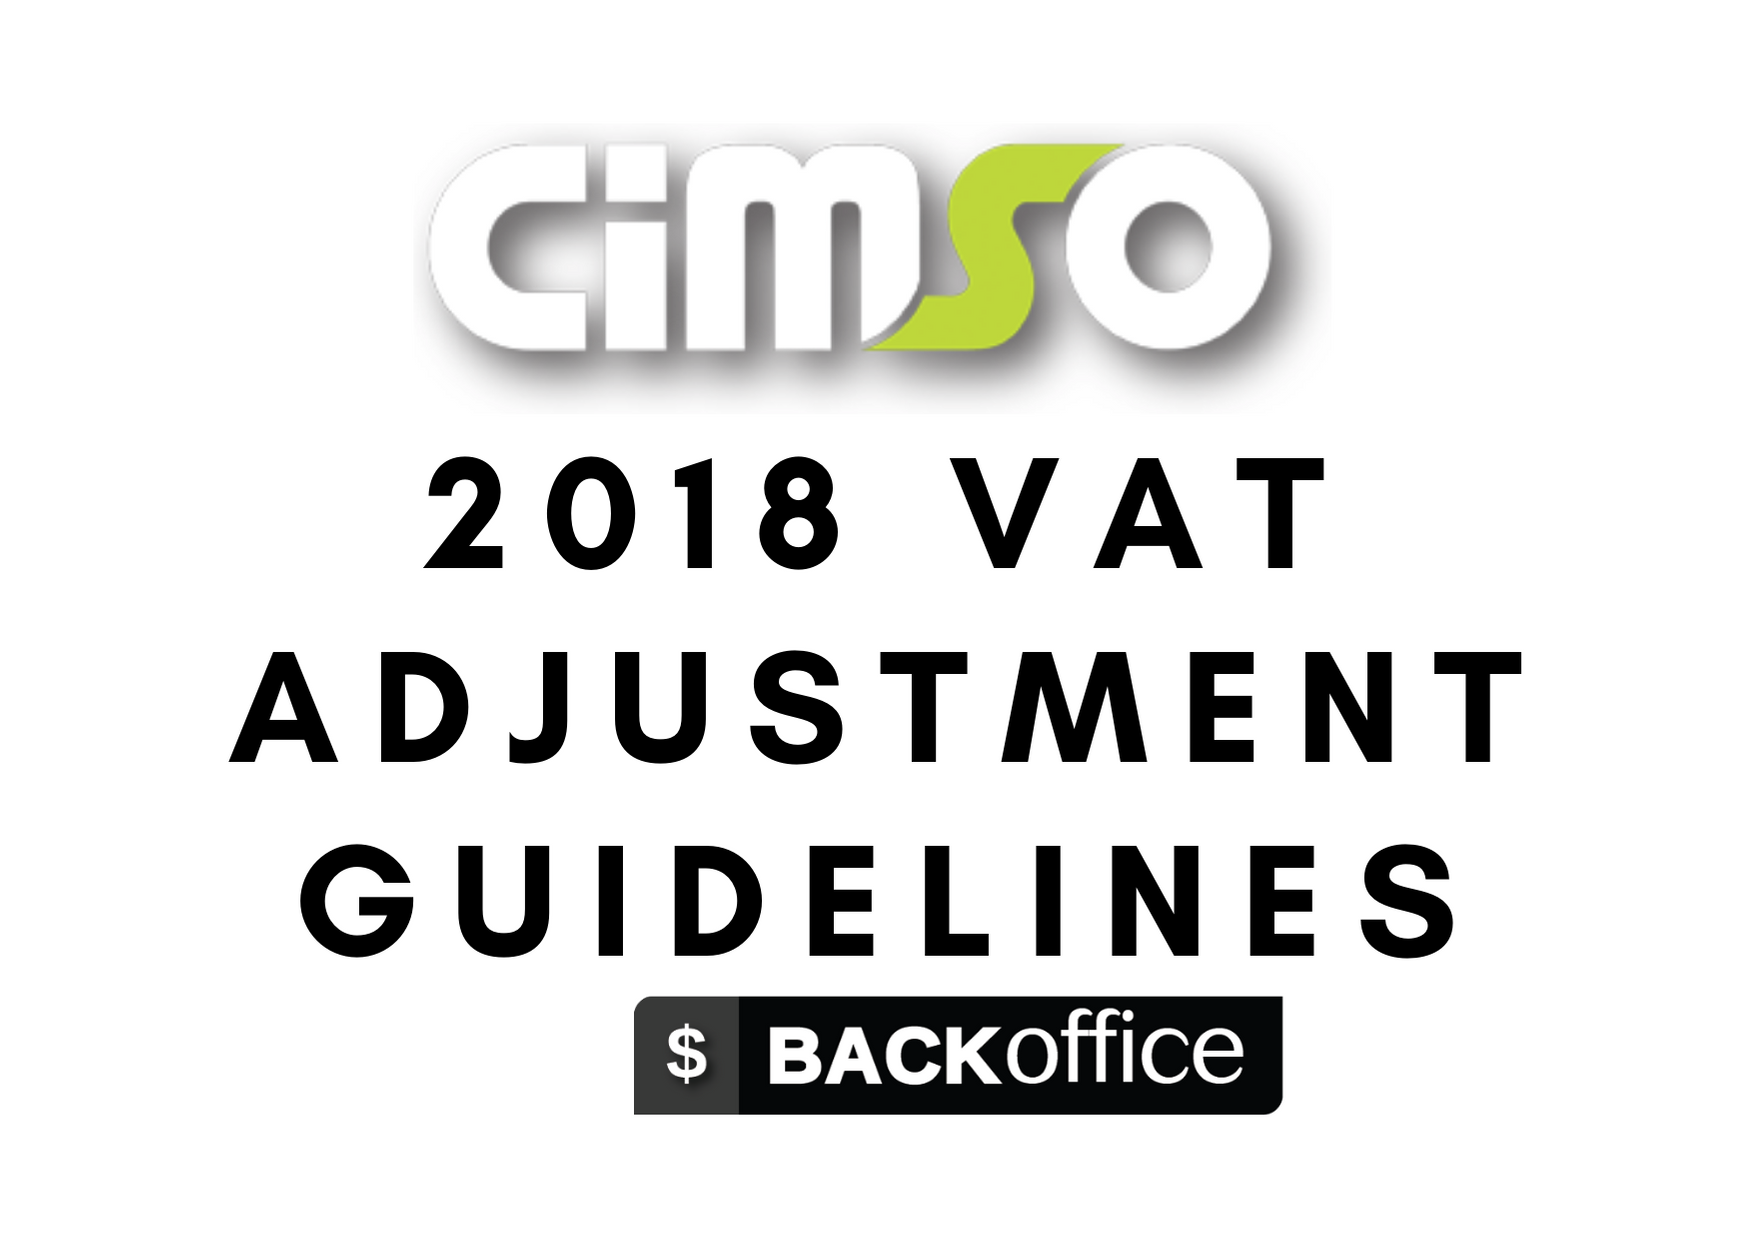 Featured image for “CiMSO dealing with South Africa’s VAT”